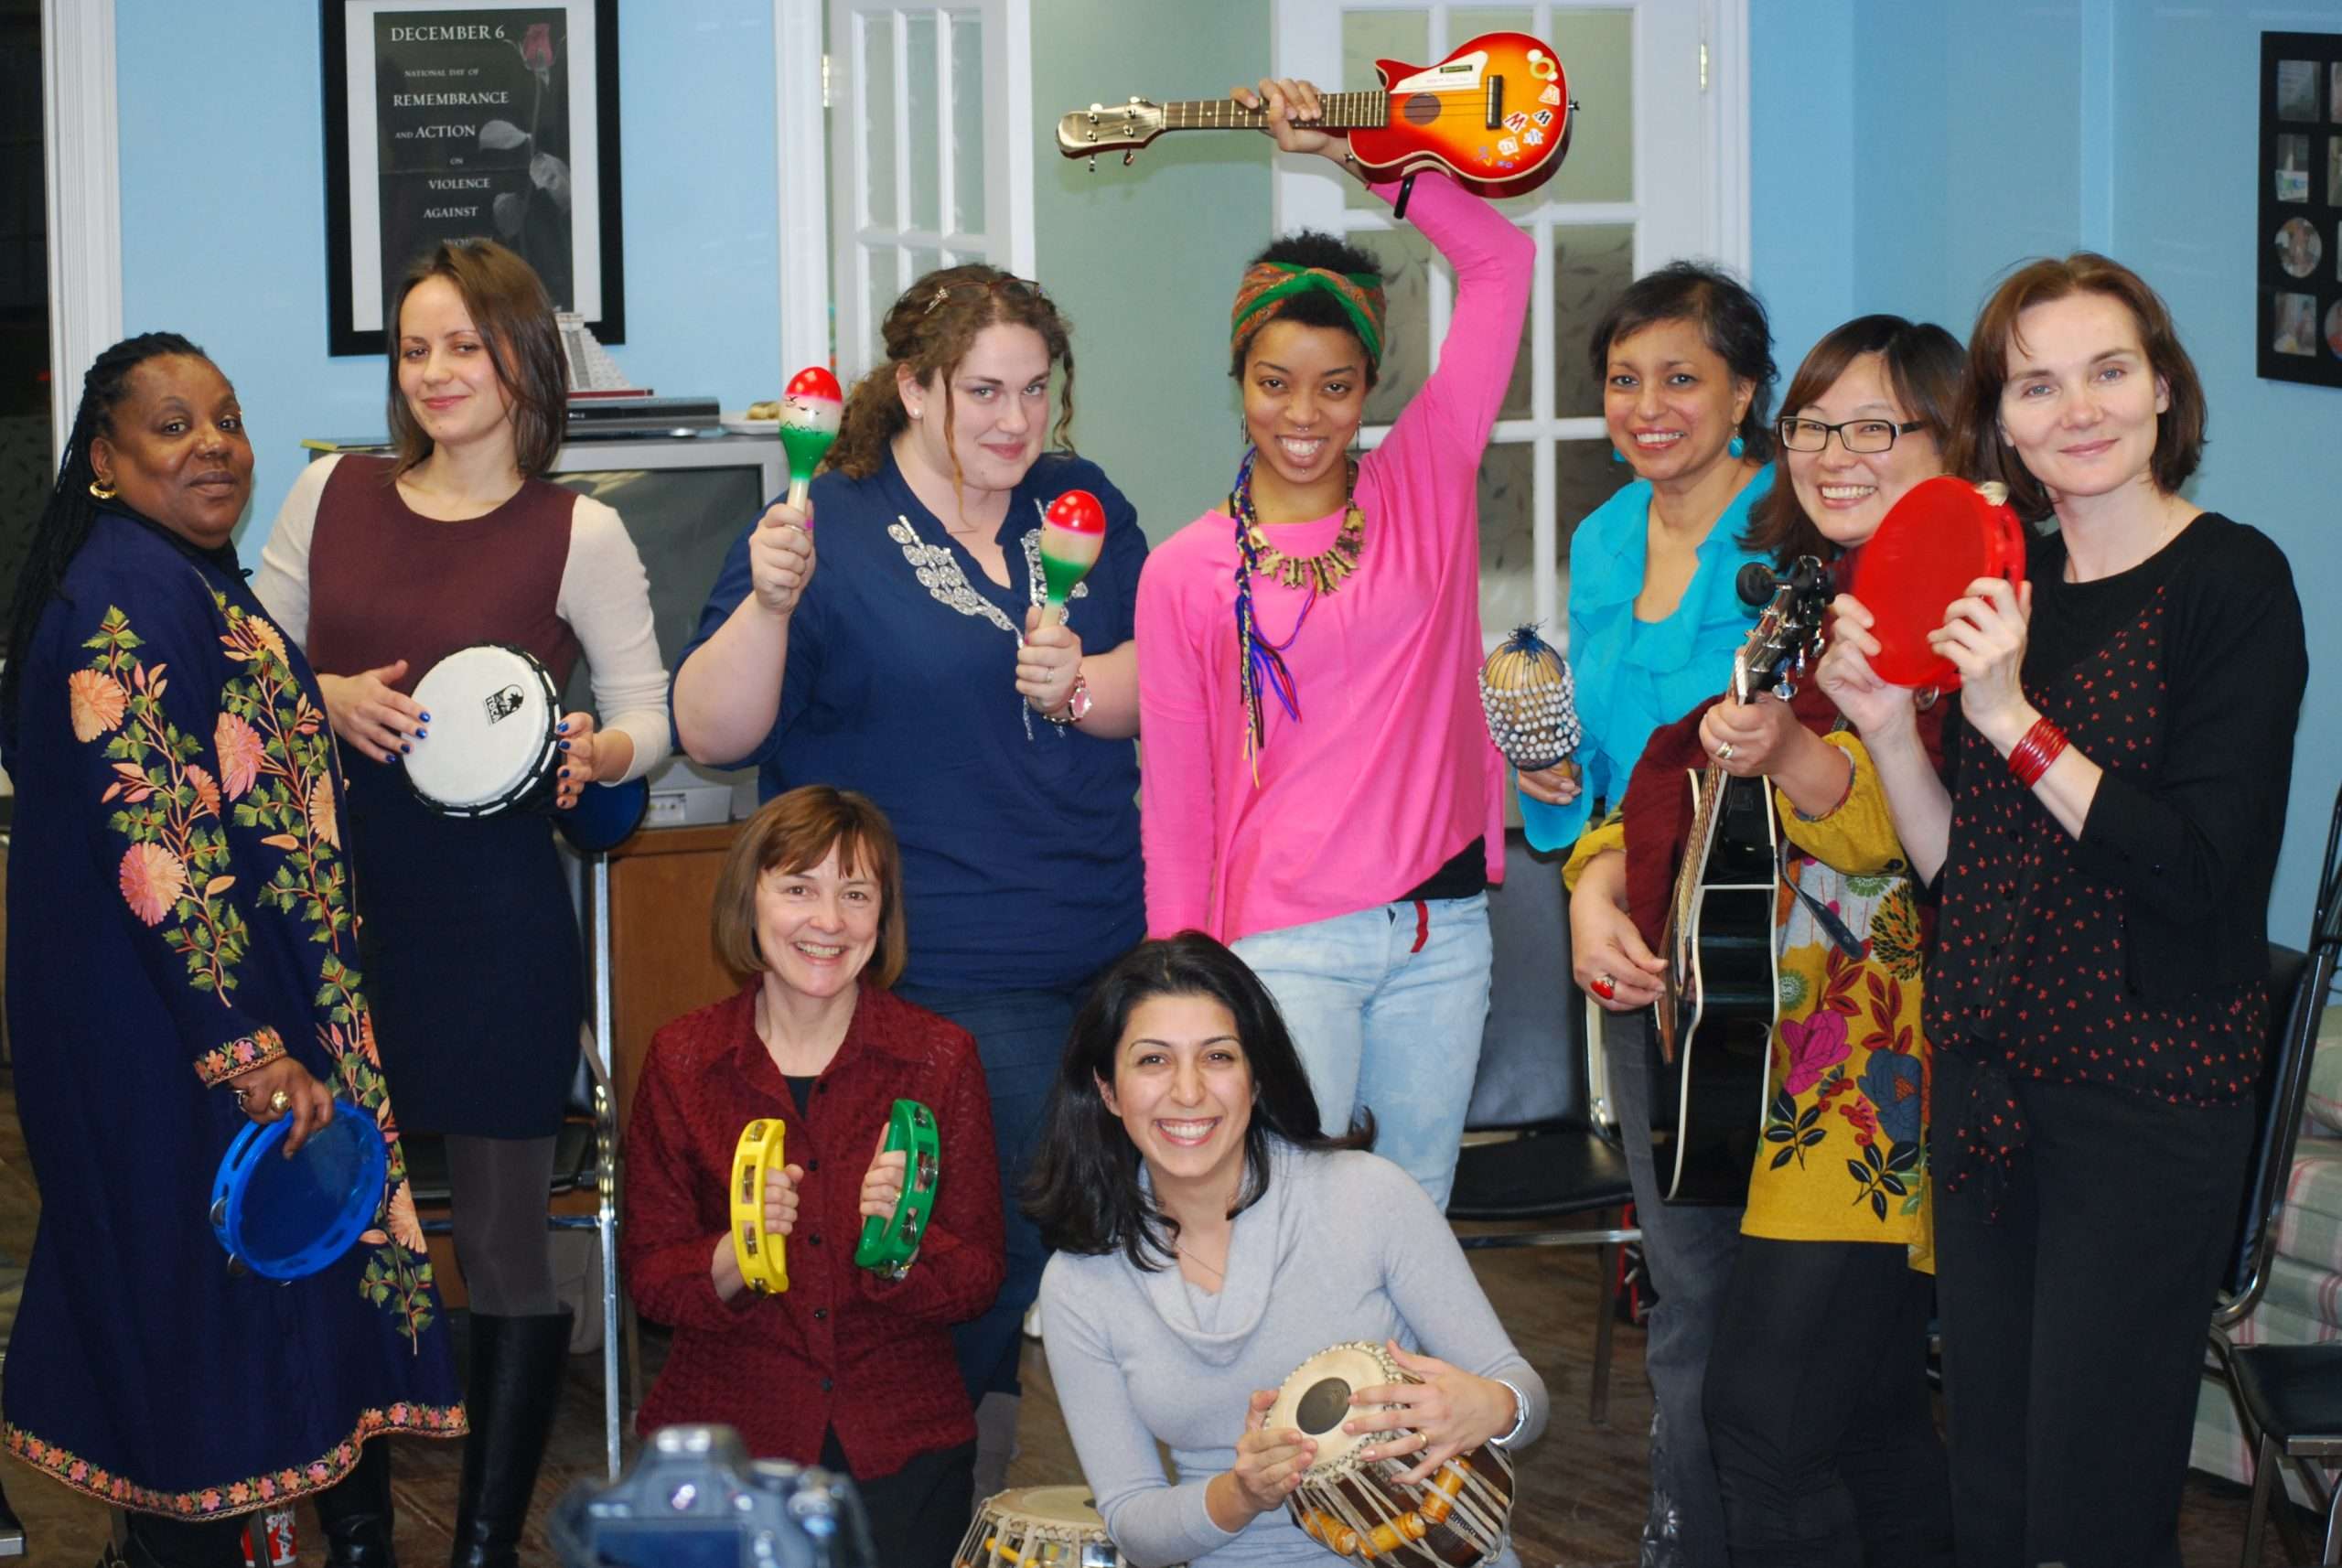 Group of women smiling and holding different musical instruments